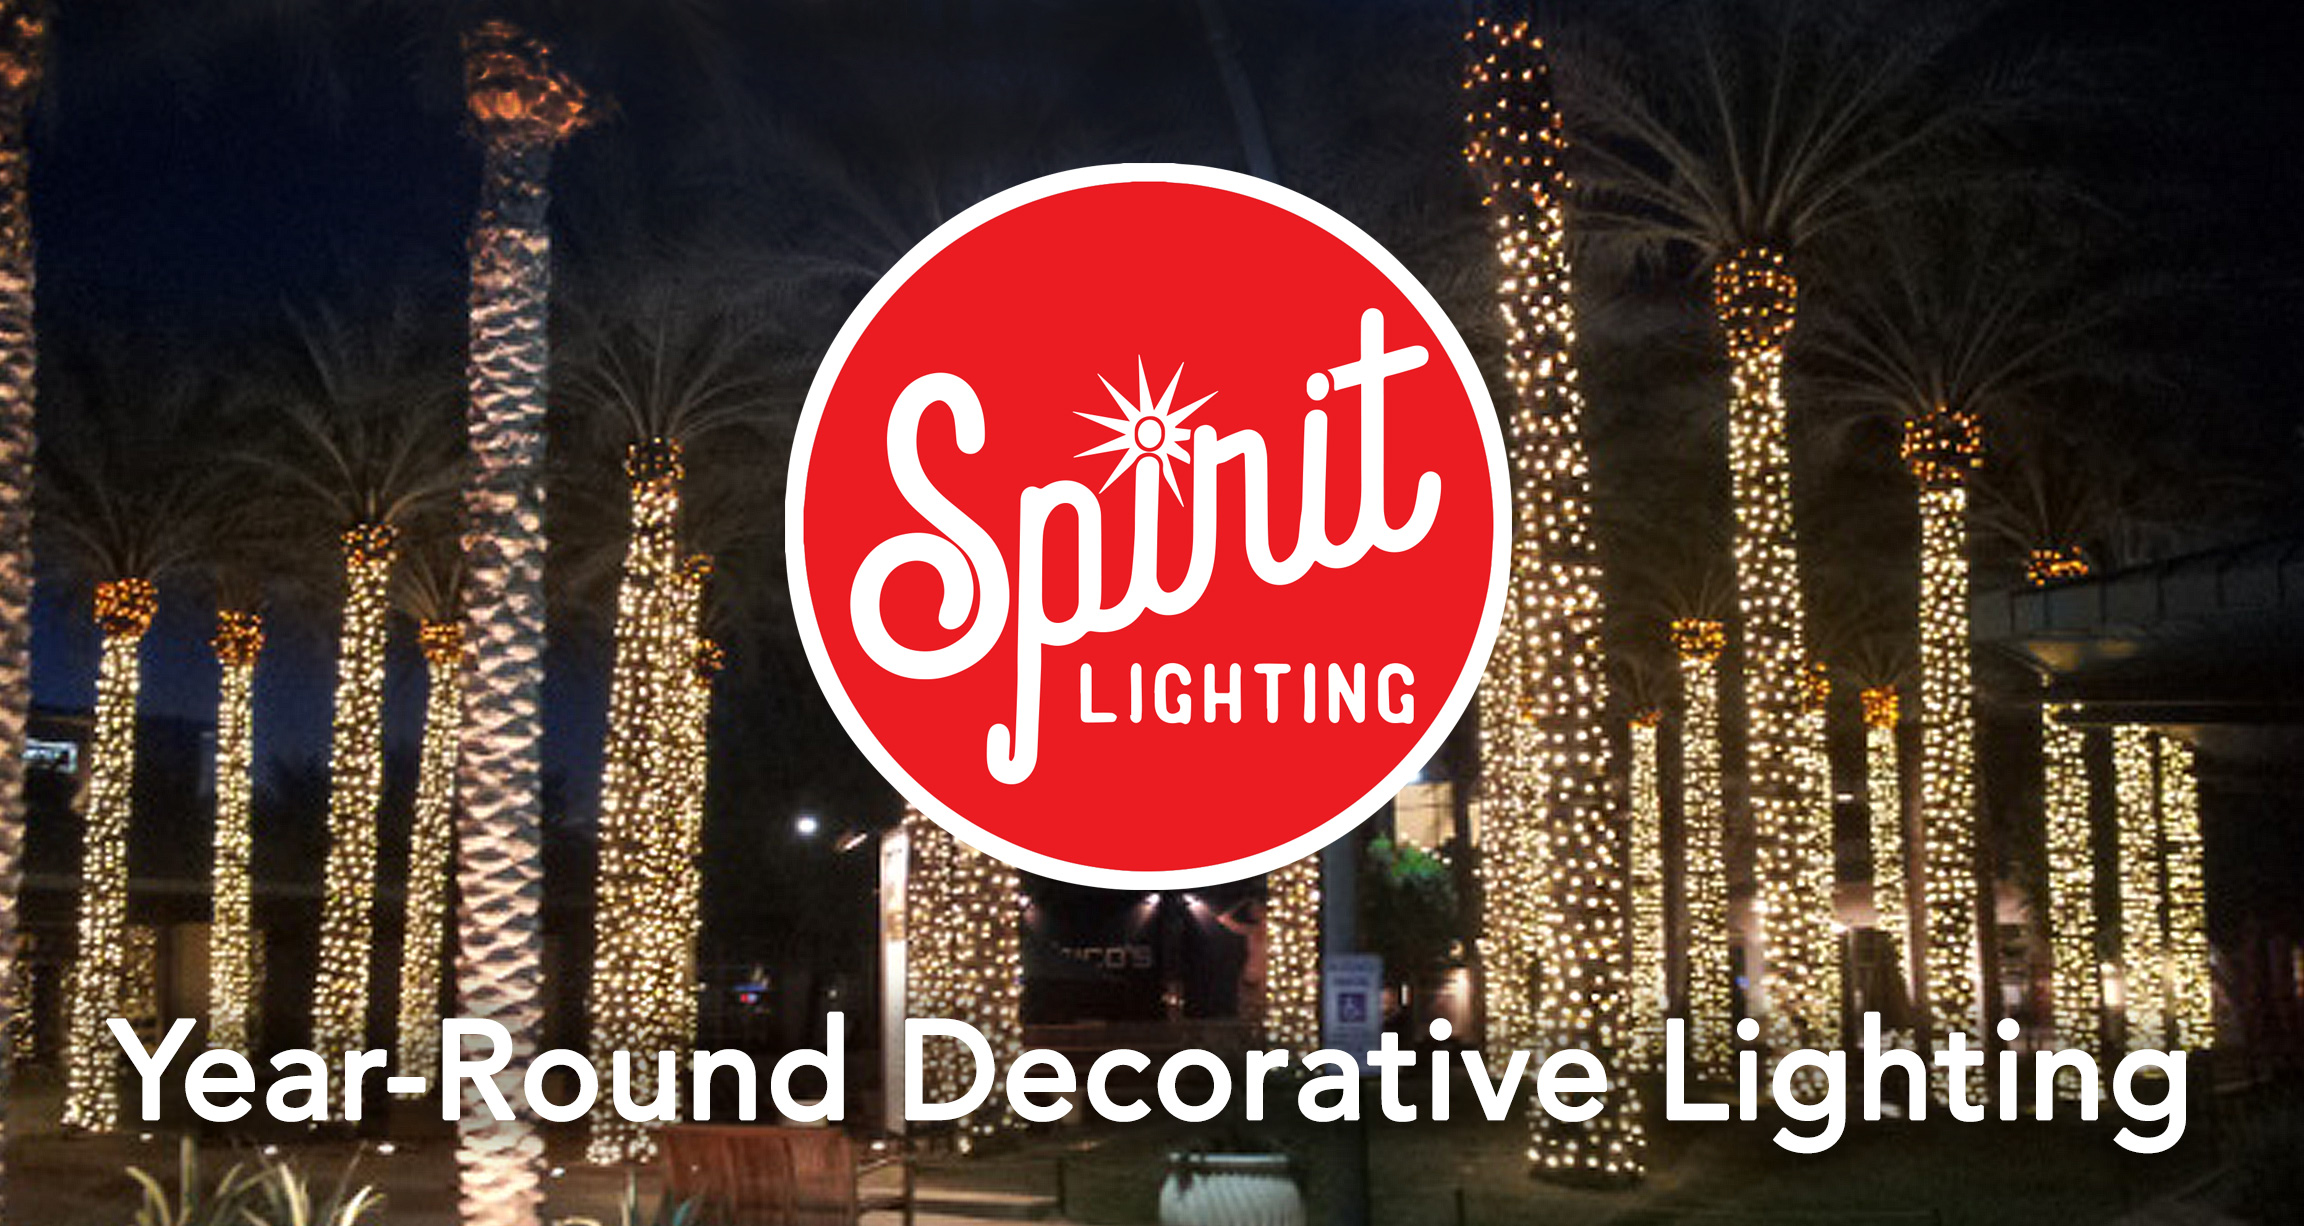 SPIRIT LIGHTING OFFERS ALL TYPES OF DECORATIVE LIGHTING THAT BOTH ILLUMINATES AND BEAUTIFIES YOUR PROPERTY